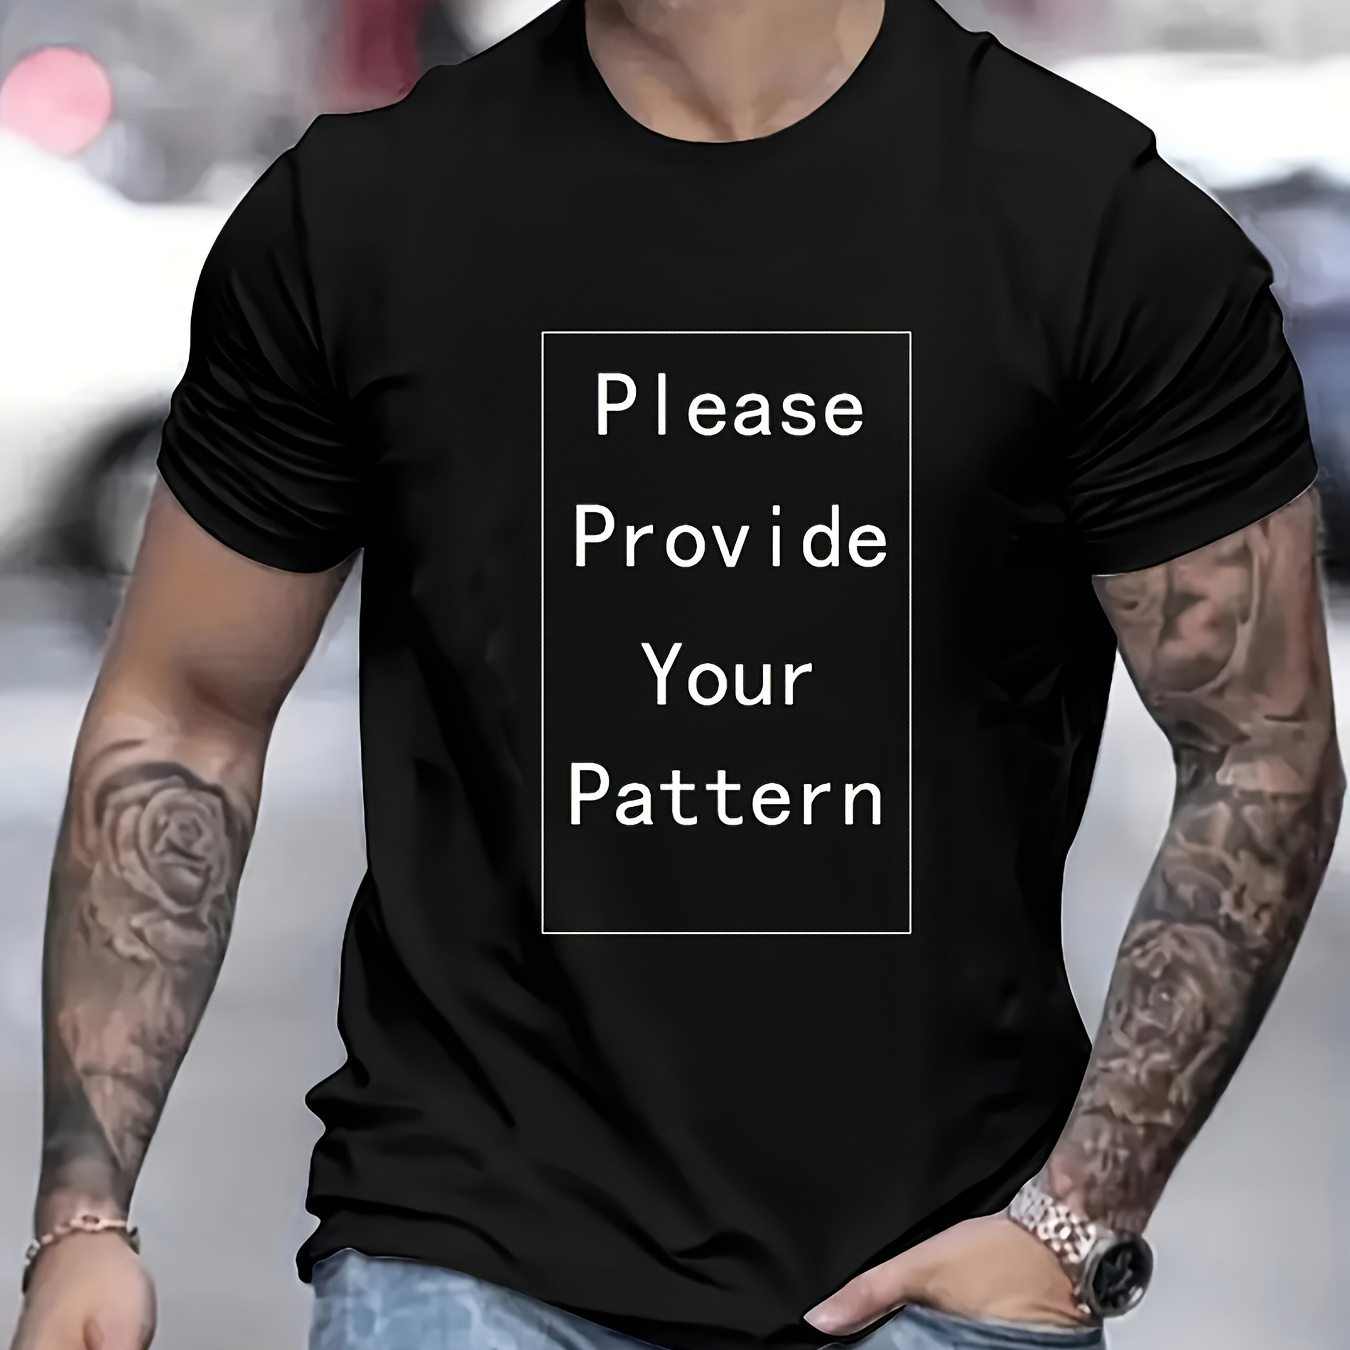 

Custom T-shirt, Personalized Tees For Men, Casual Short Sleeve Custom Printed T-shirt For Summer